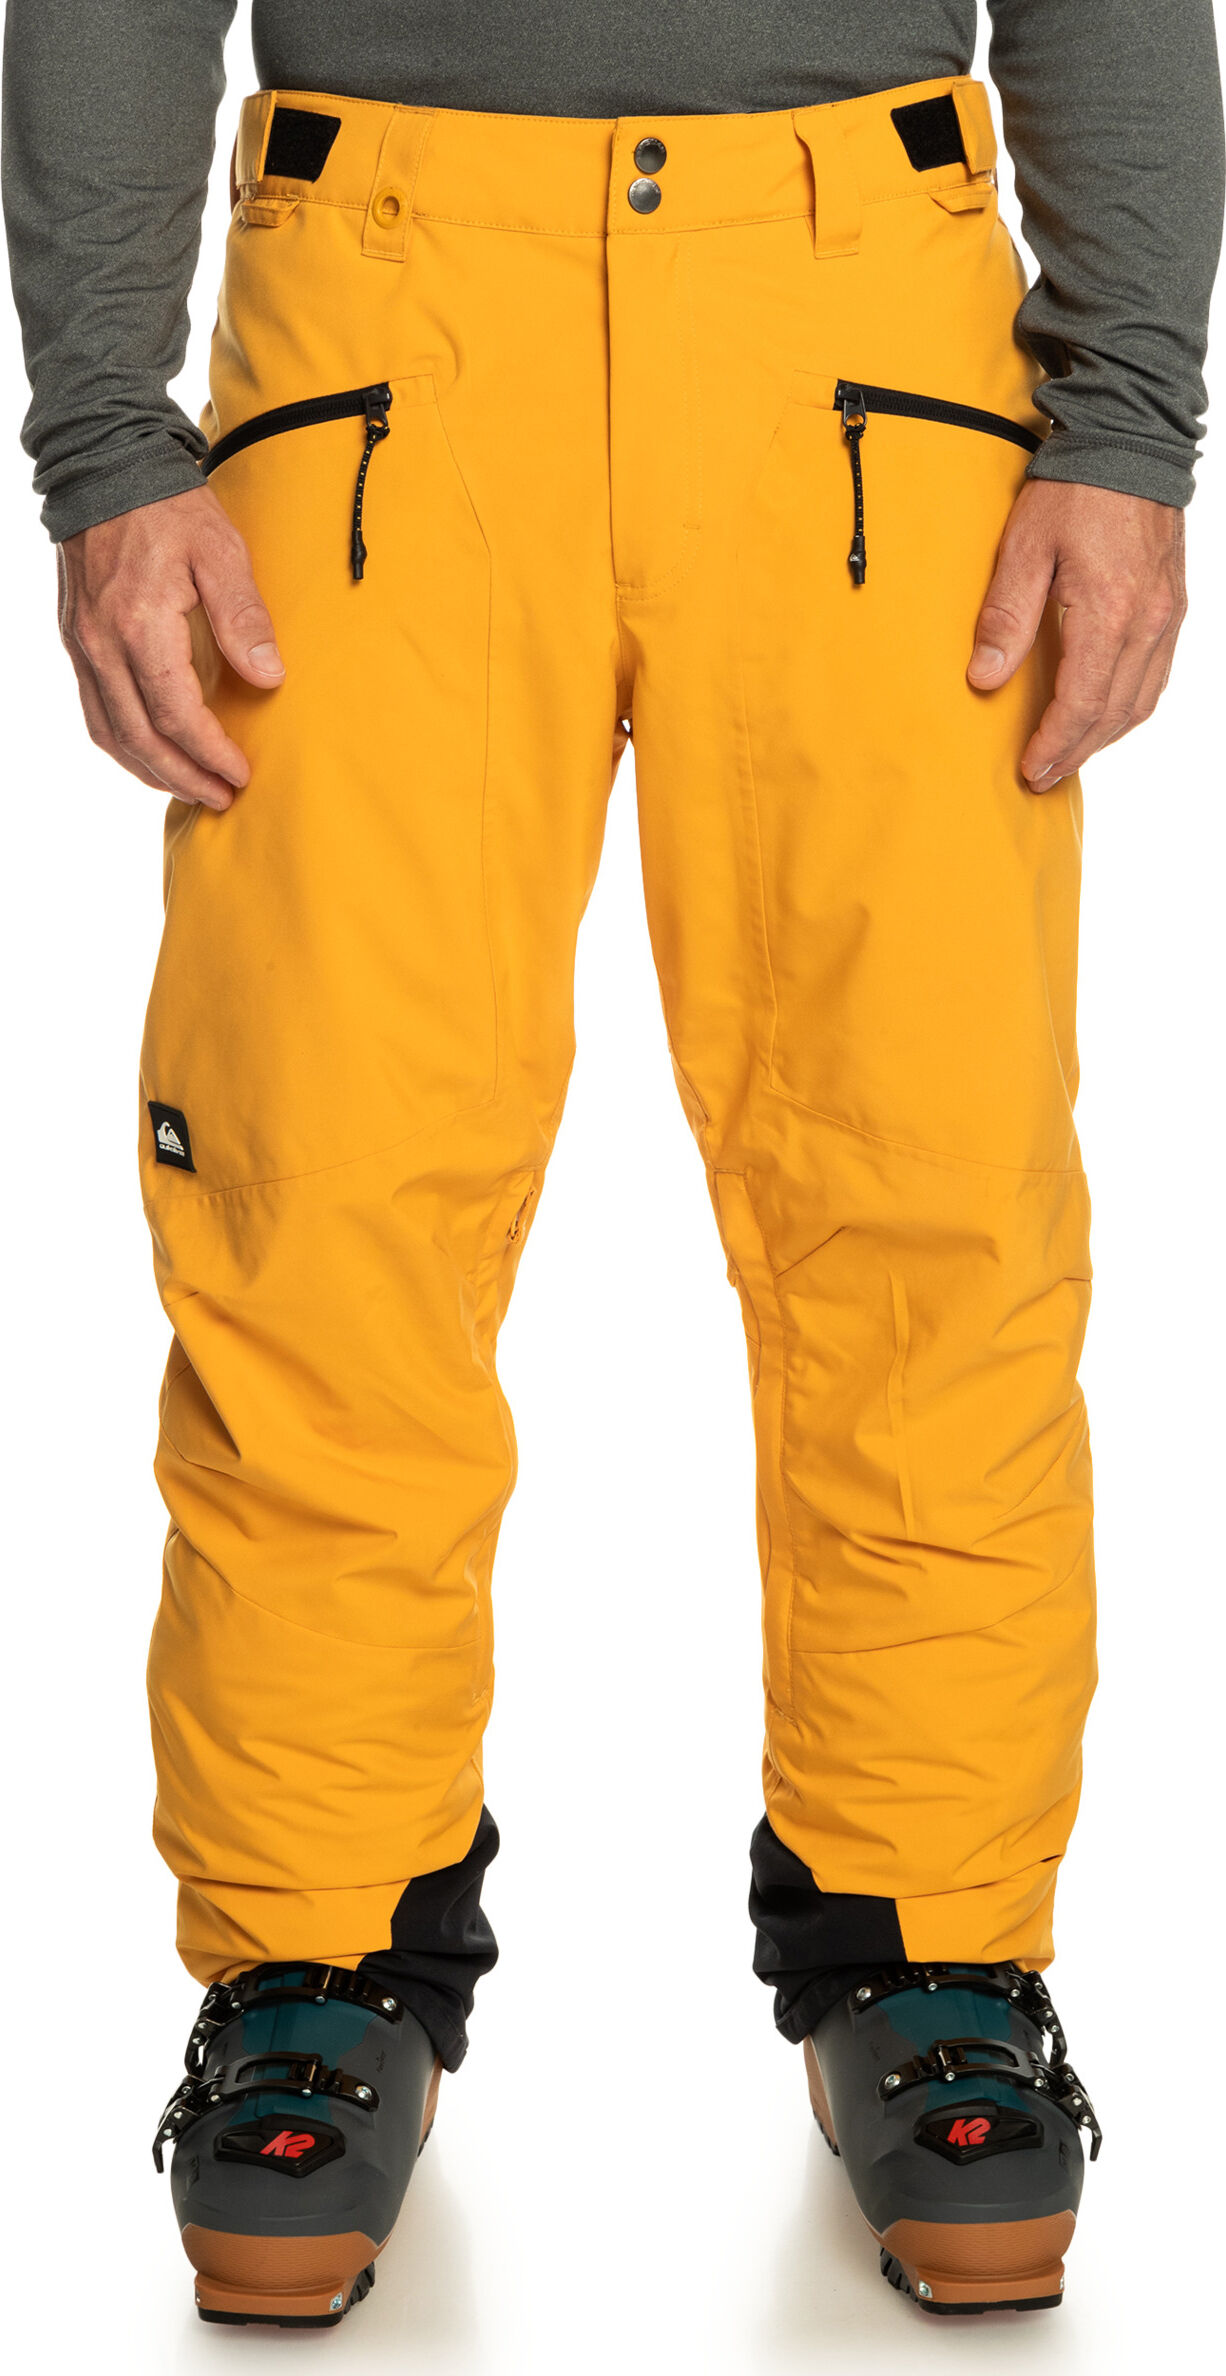 Quiksilver BOUNDRY MINERAL YELLOW L